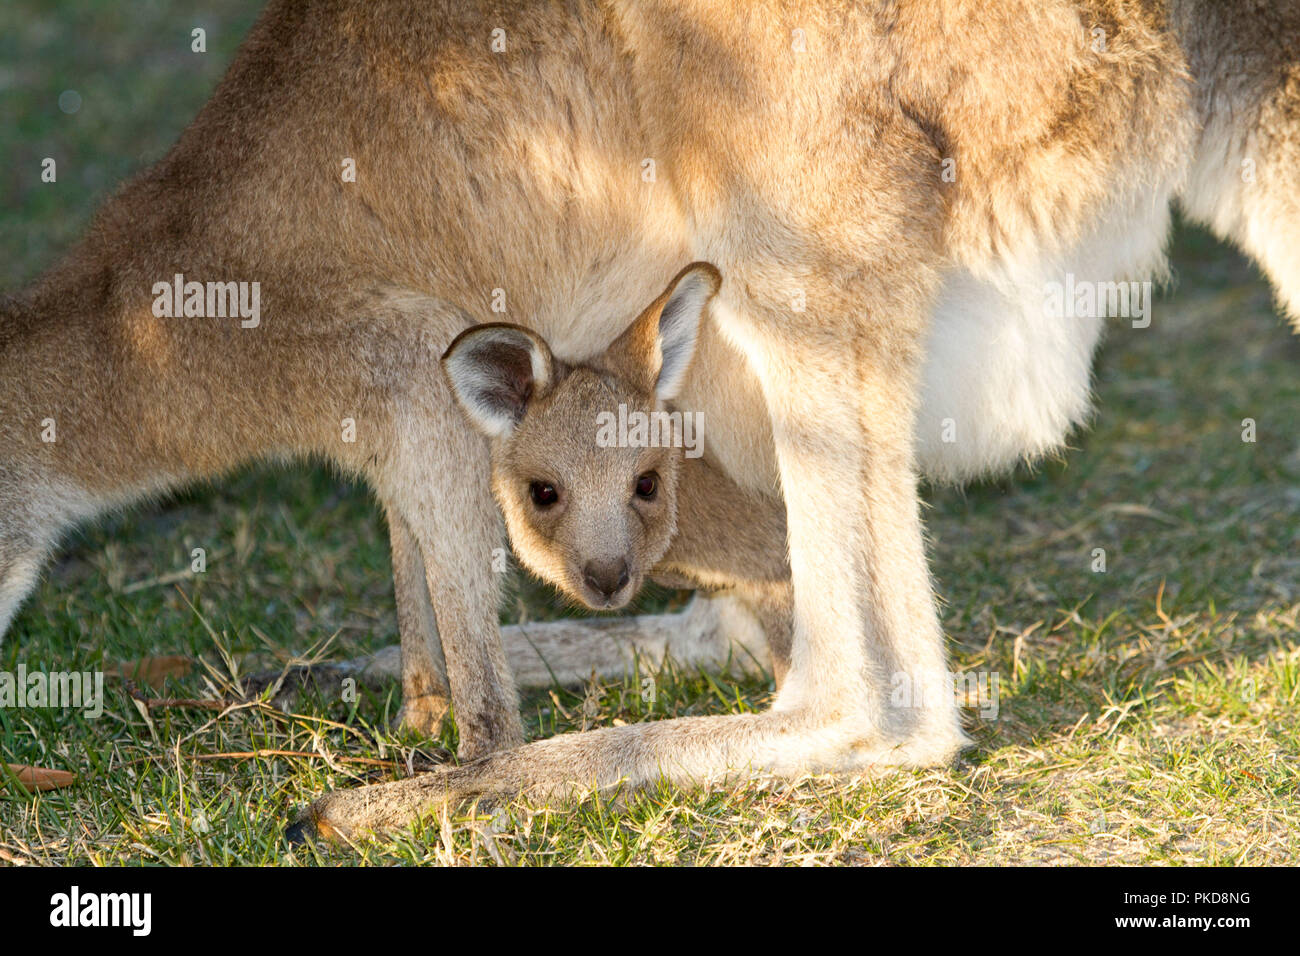 Baby joey eastern grey kangaroo, Macropus giganteus, peering out of pouch between its mohter's legs & staring at camera -  in NSW Australia Stock Photo